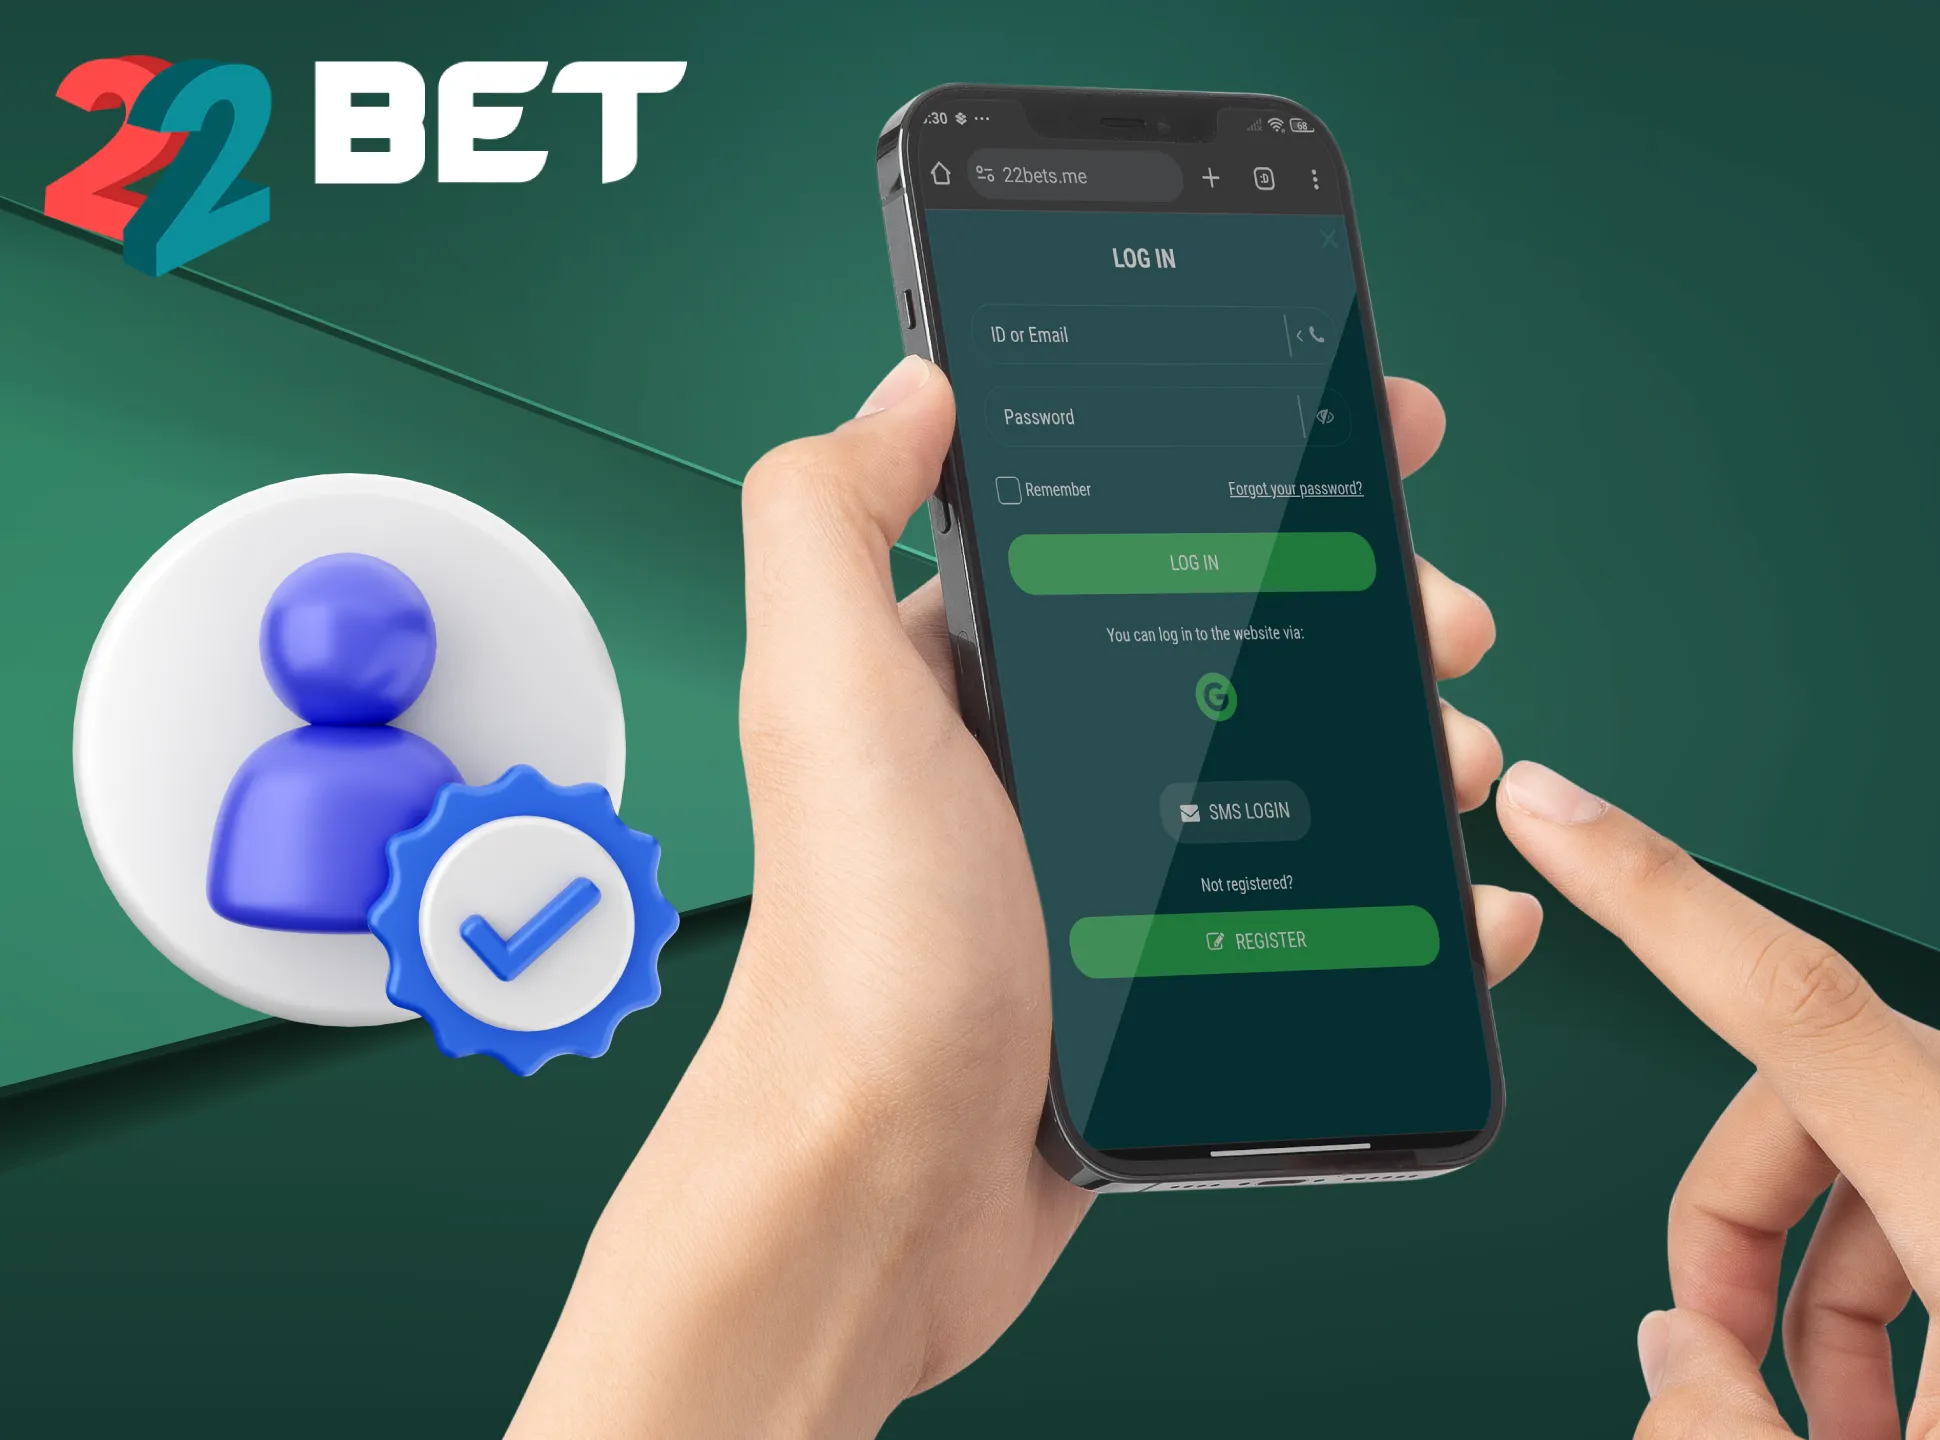 To log in to the 22bet app enter your personal login and password.